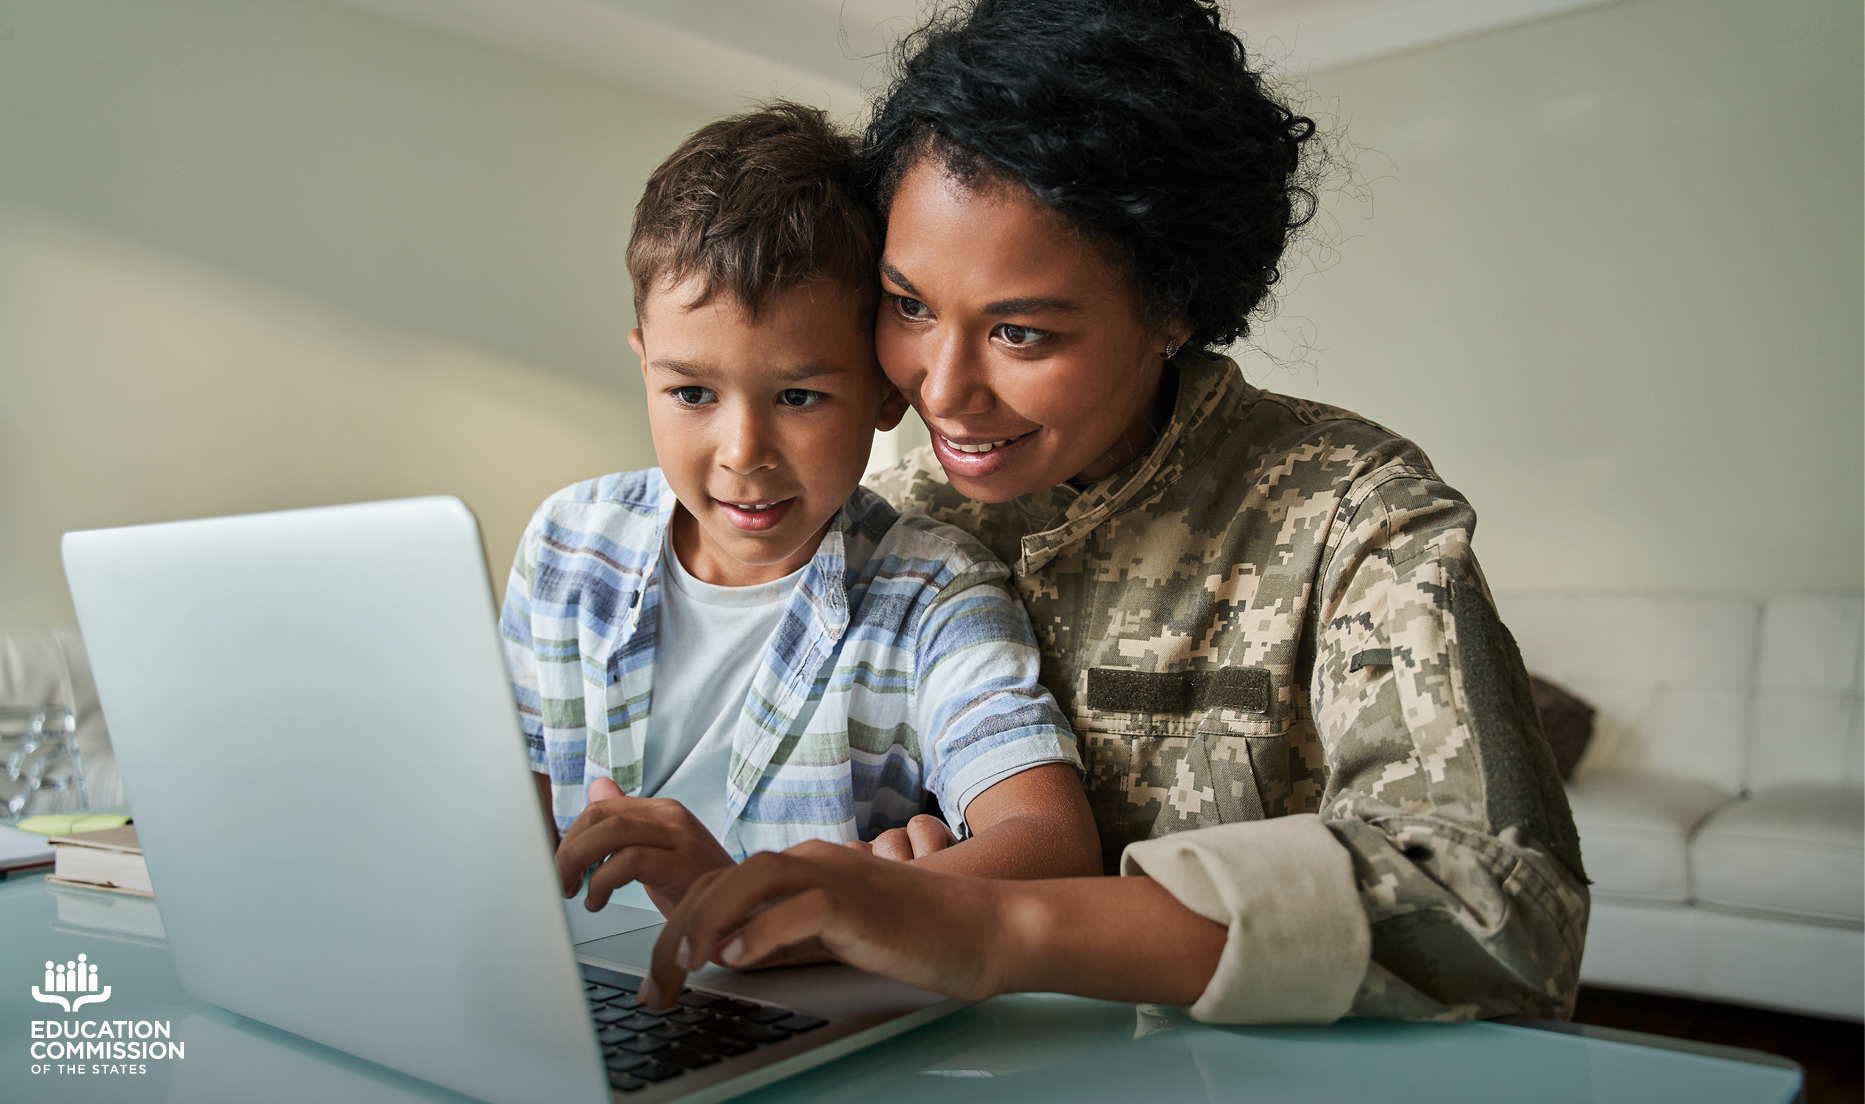 A young student sits on his mother's lap while working on a homework assignment on a laptop computer. The mother is wearing a military uniform.